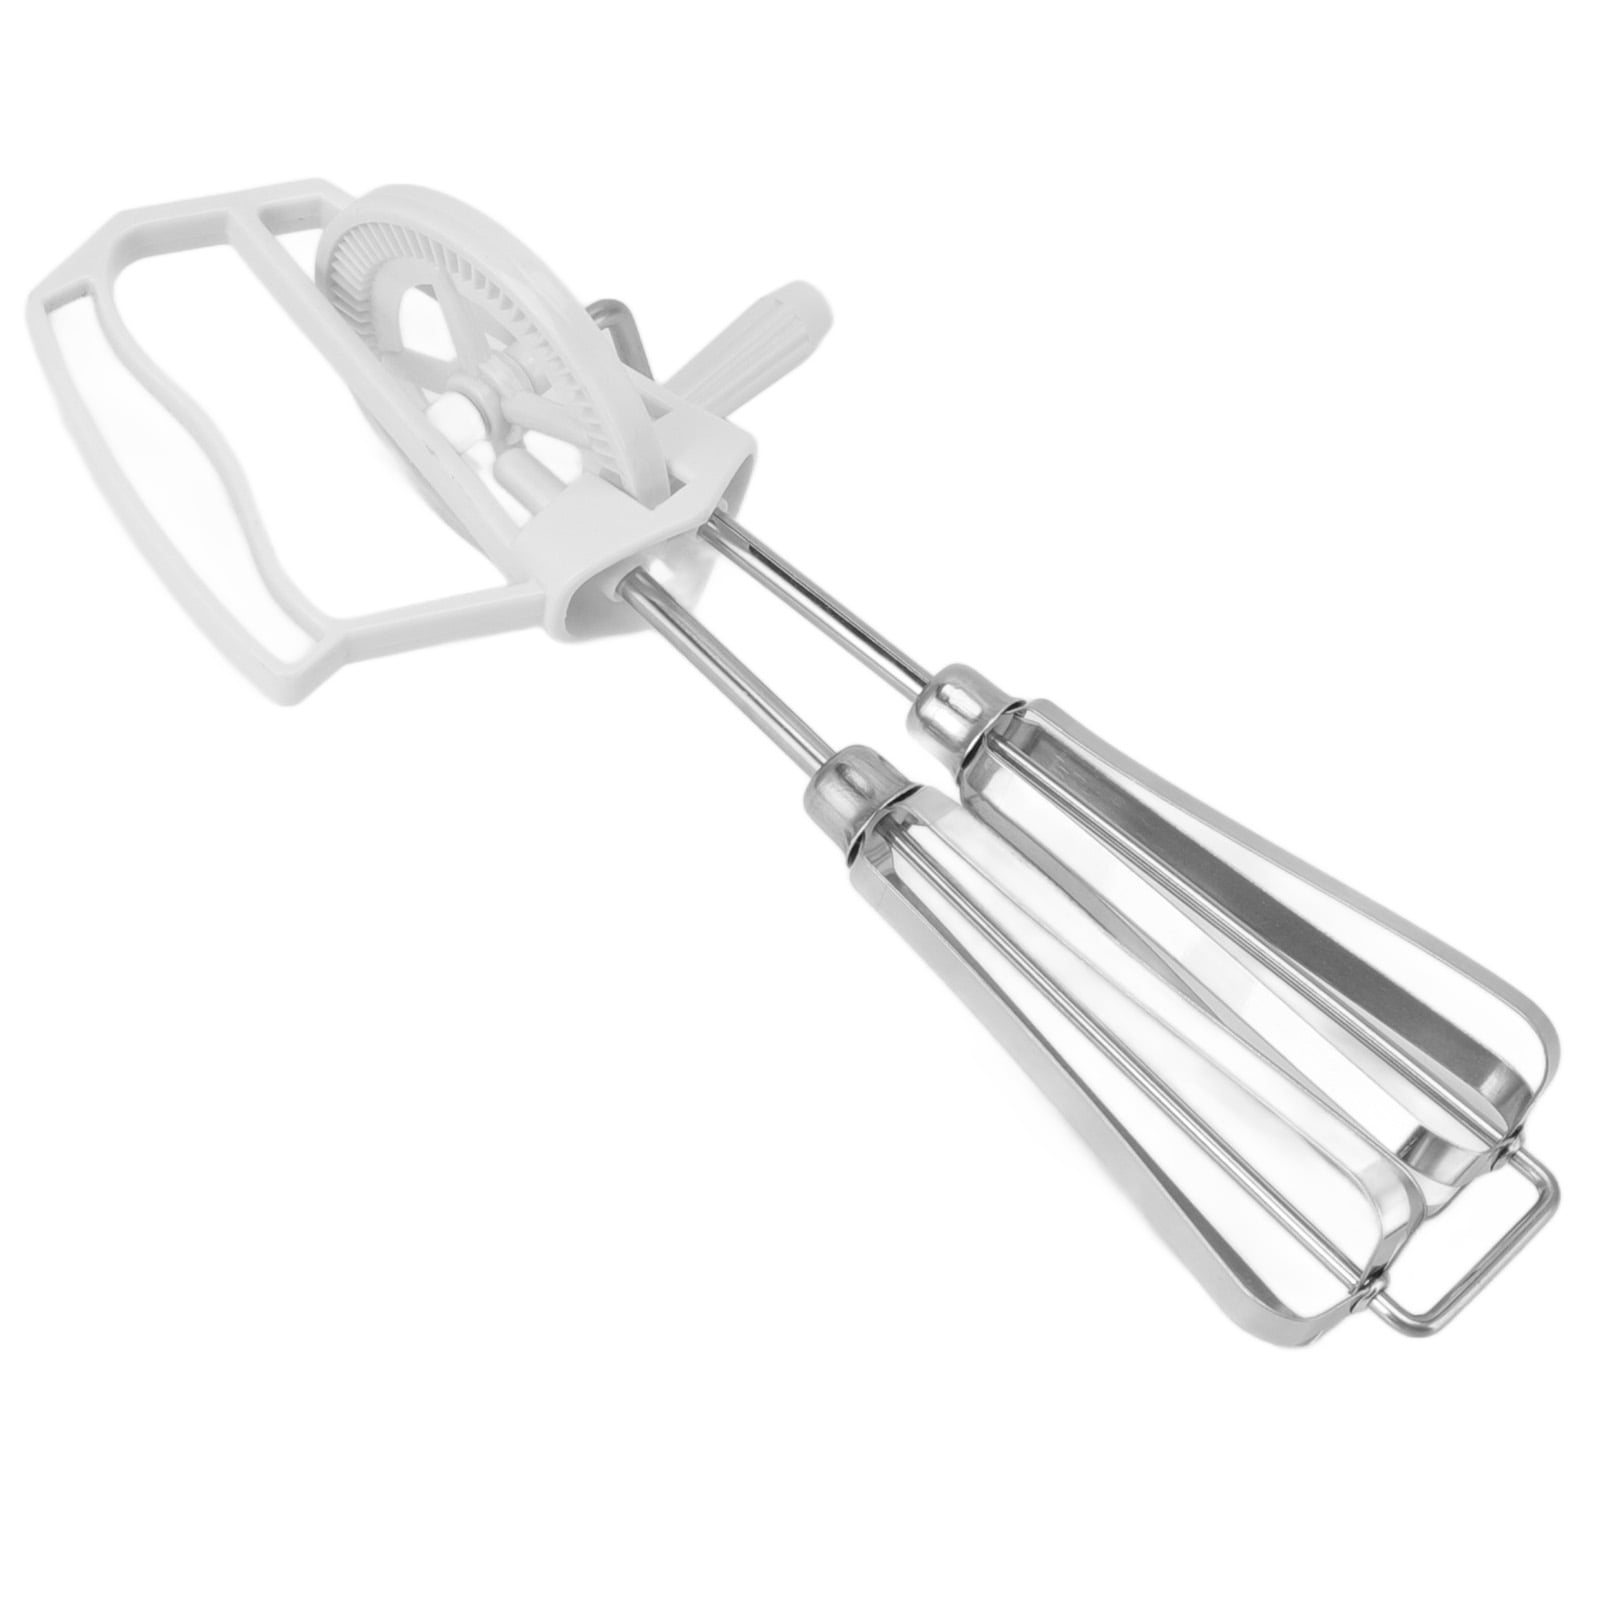 Manual Hand Mixer, Stainless Steel Hand Crank For Cooking White 